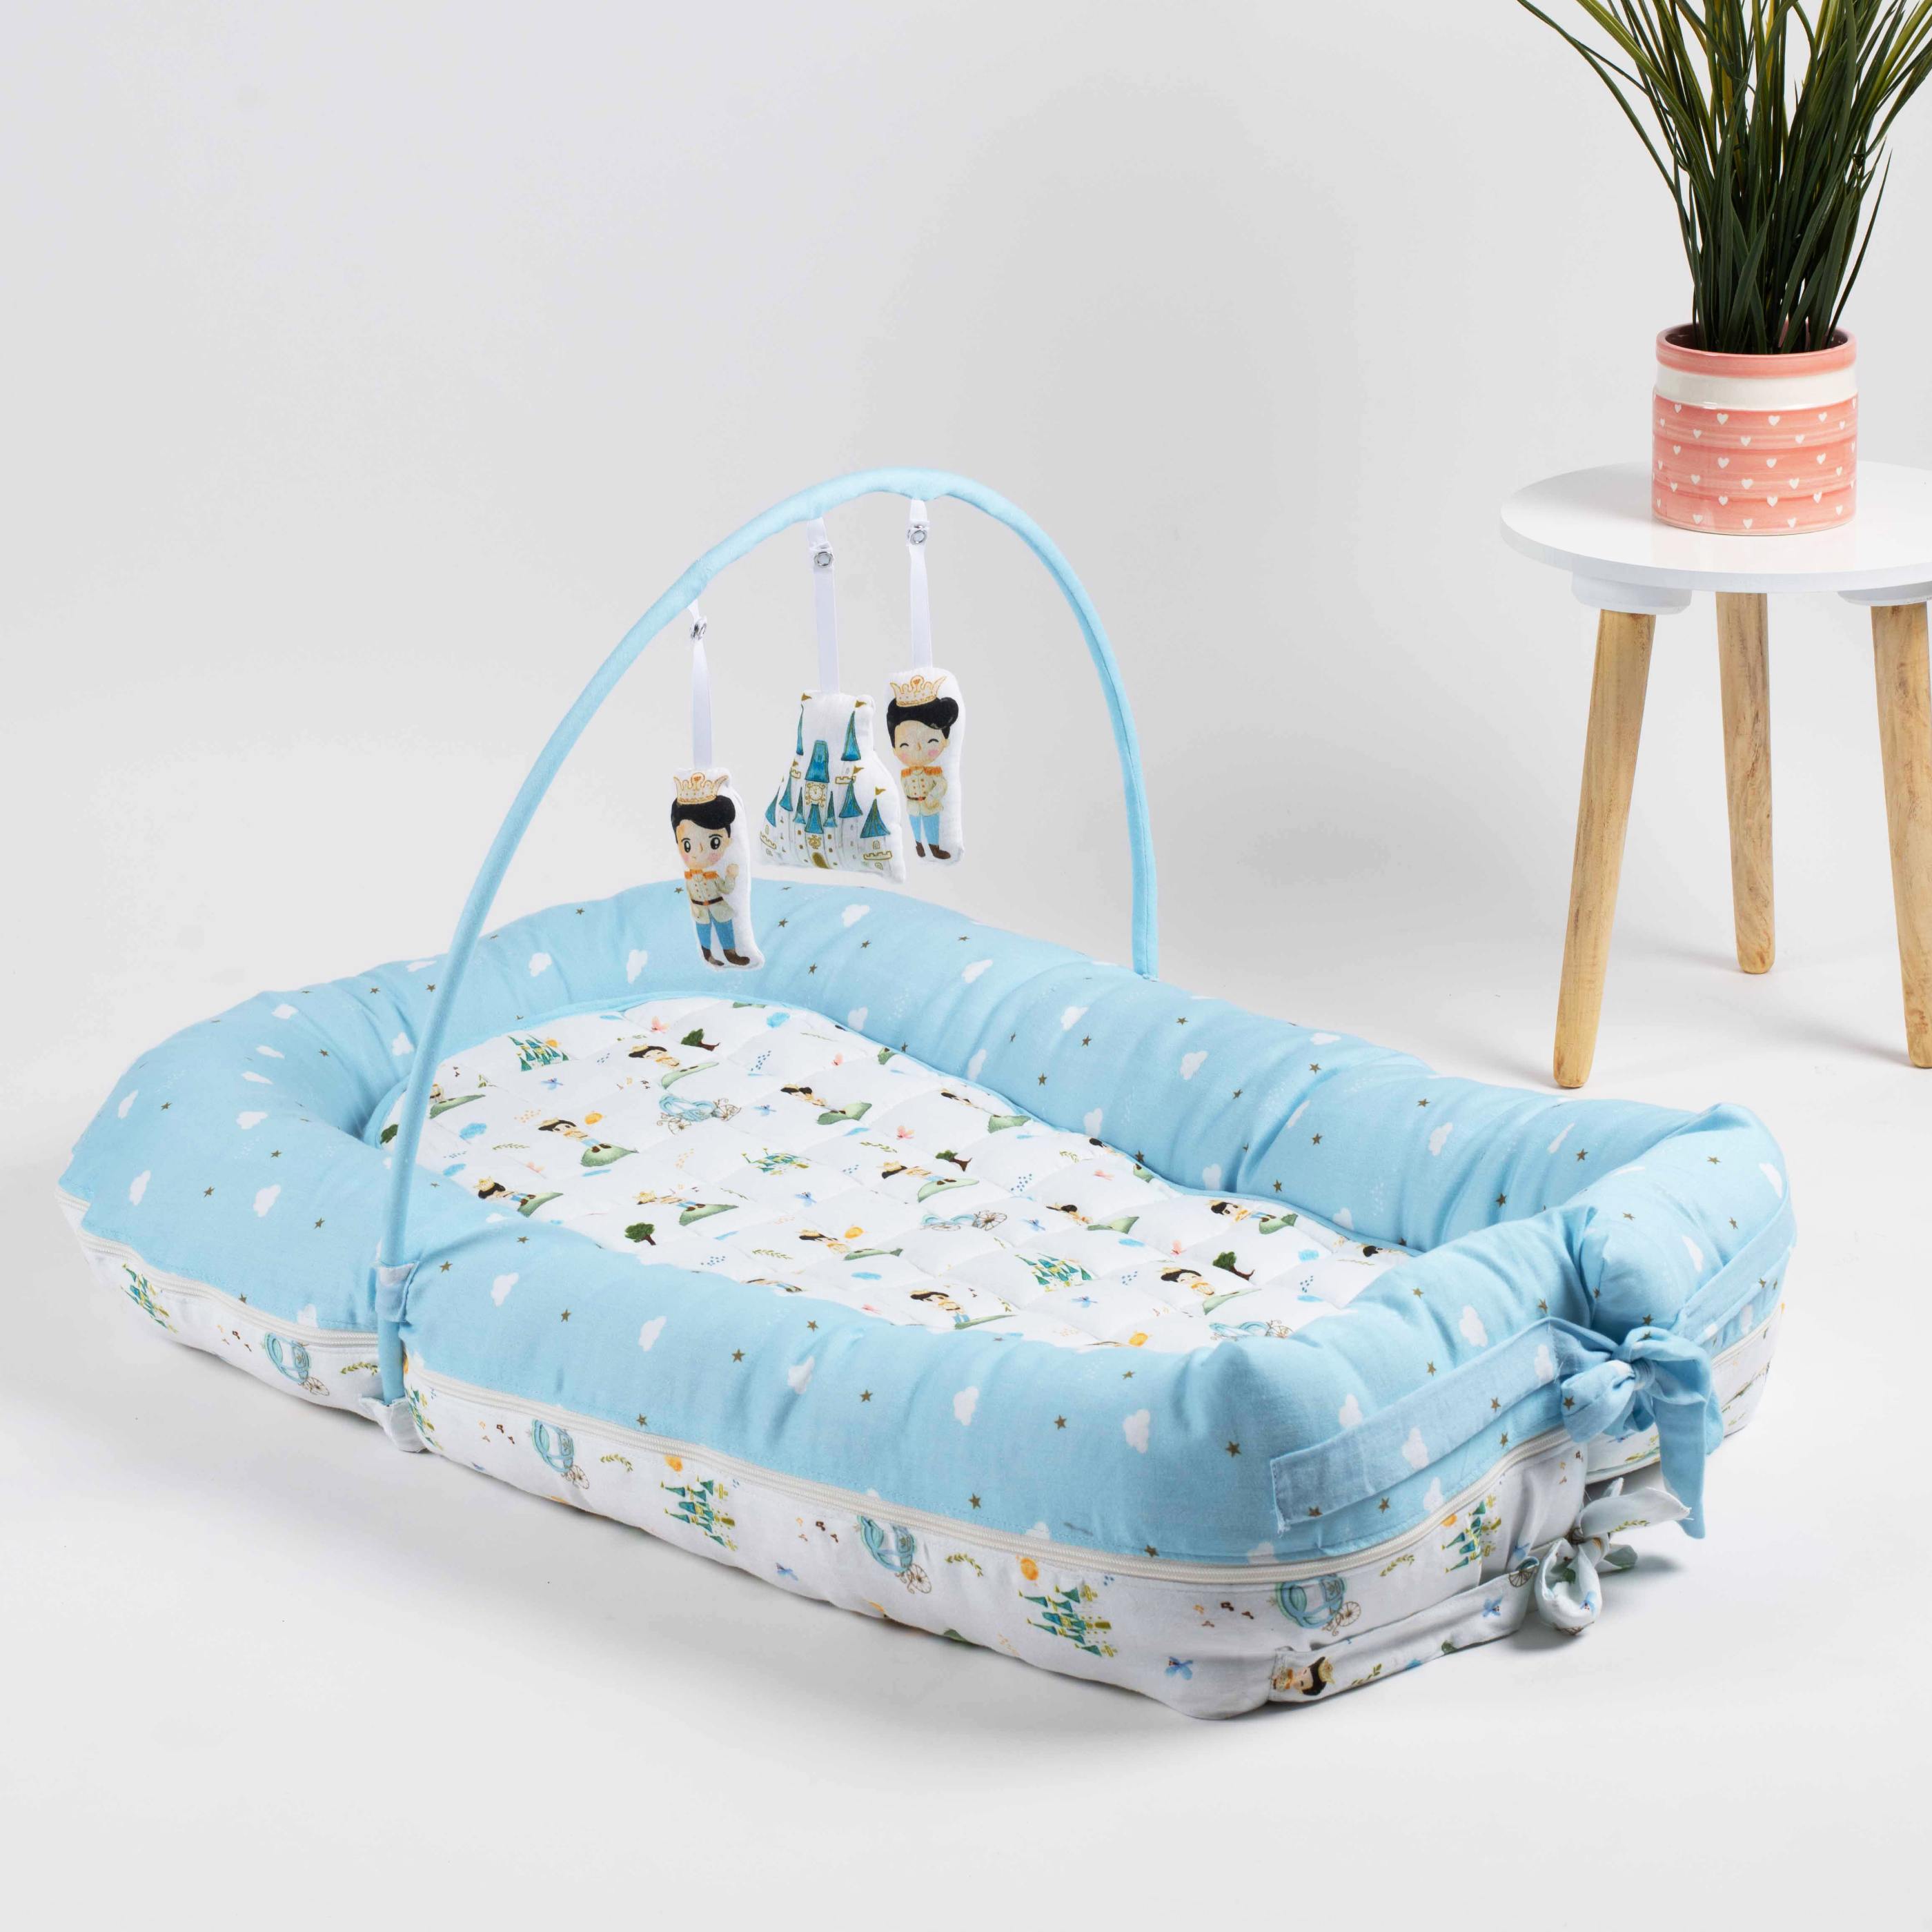 Tiny Snooze Reversible Baby Nest- The Little Prince